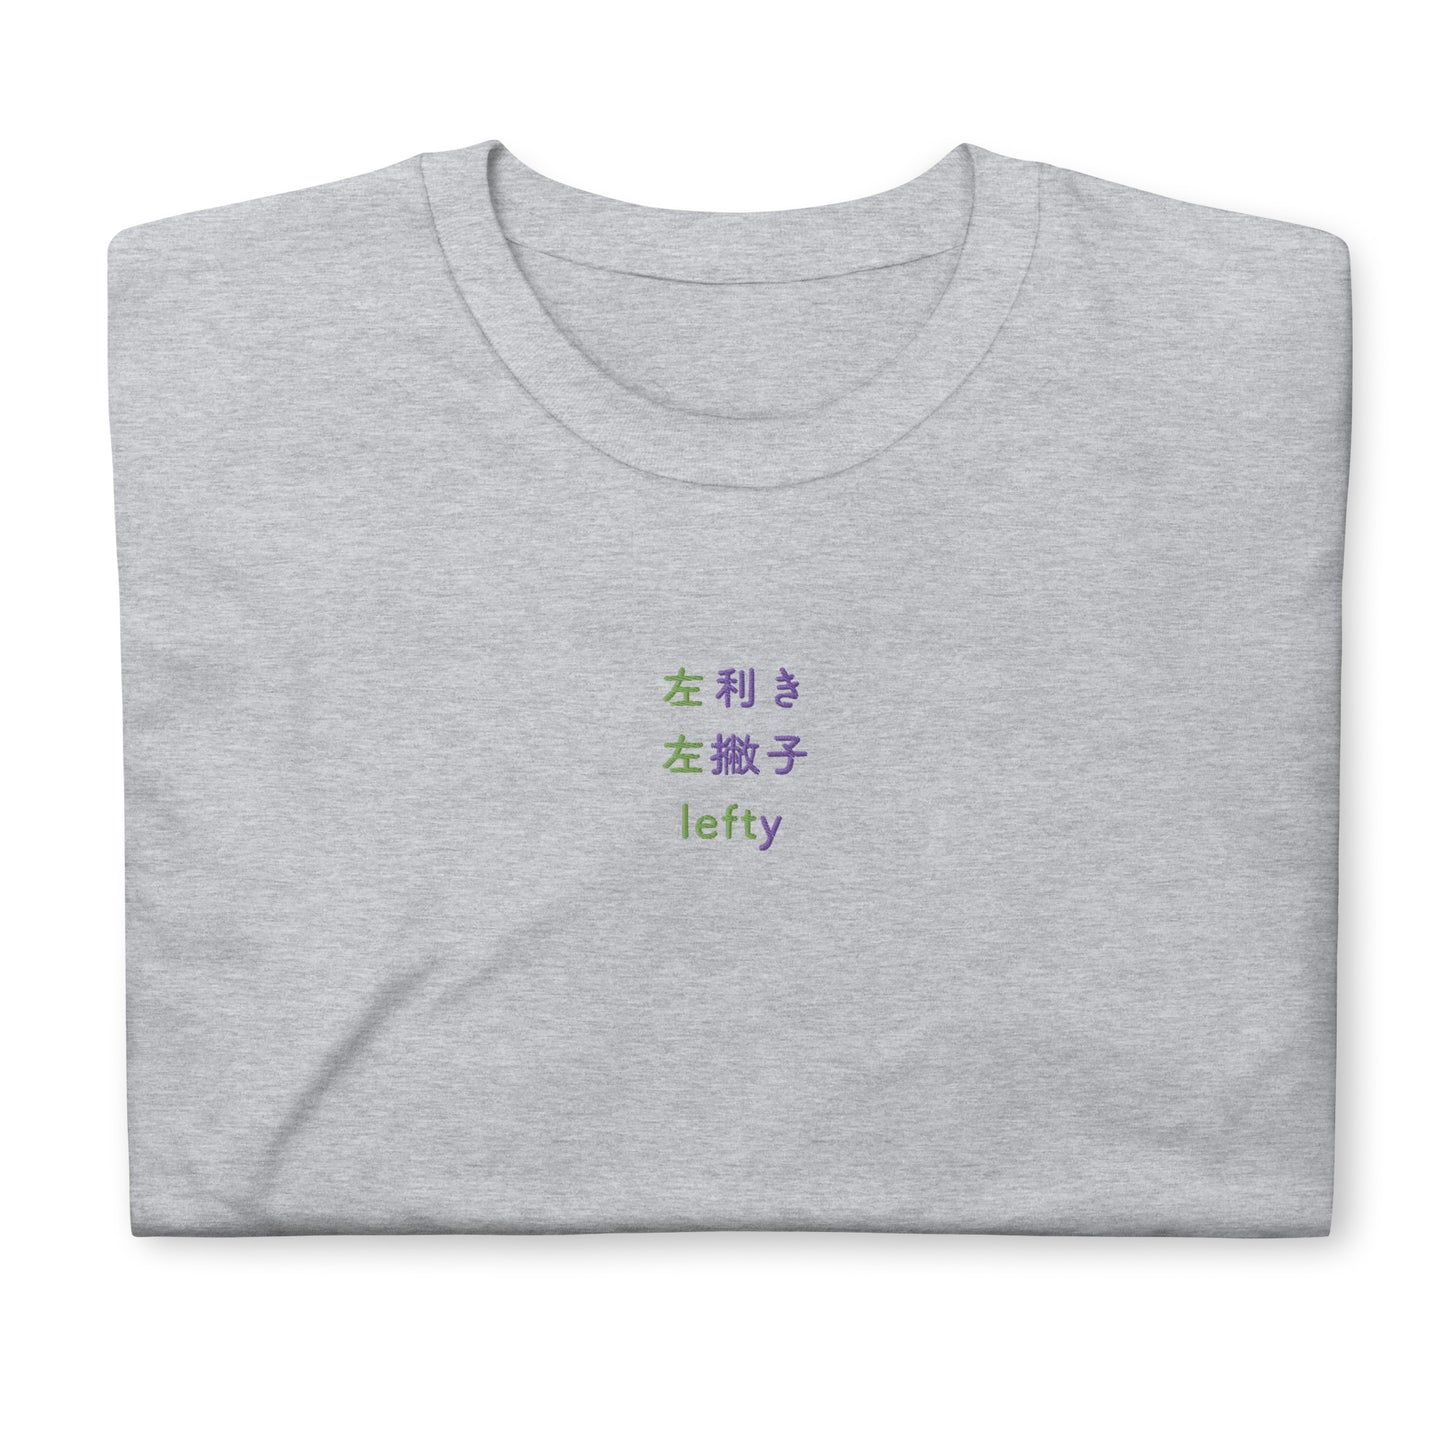 Light Gray High Quality Tee - Front Design with an Green, Purple Embroidery "Lefty" in Japanese,Chinese and English